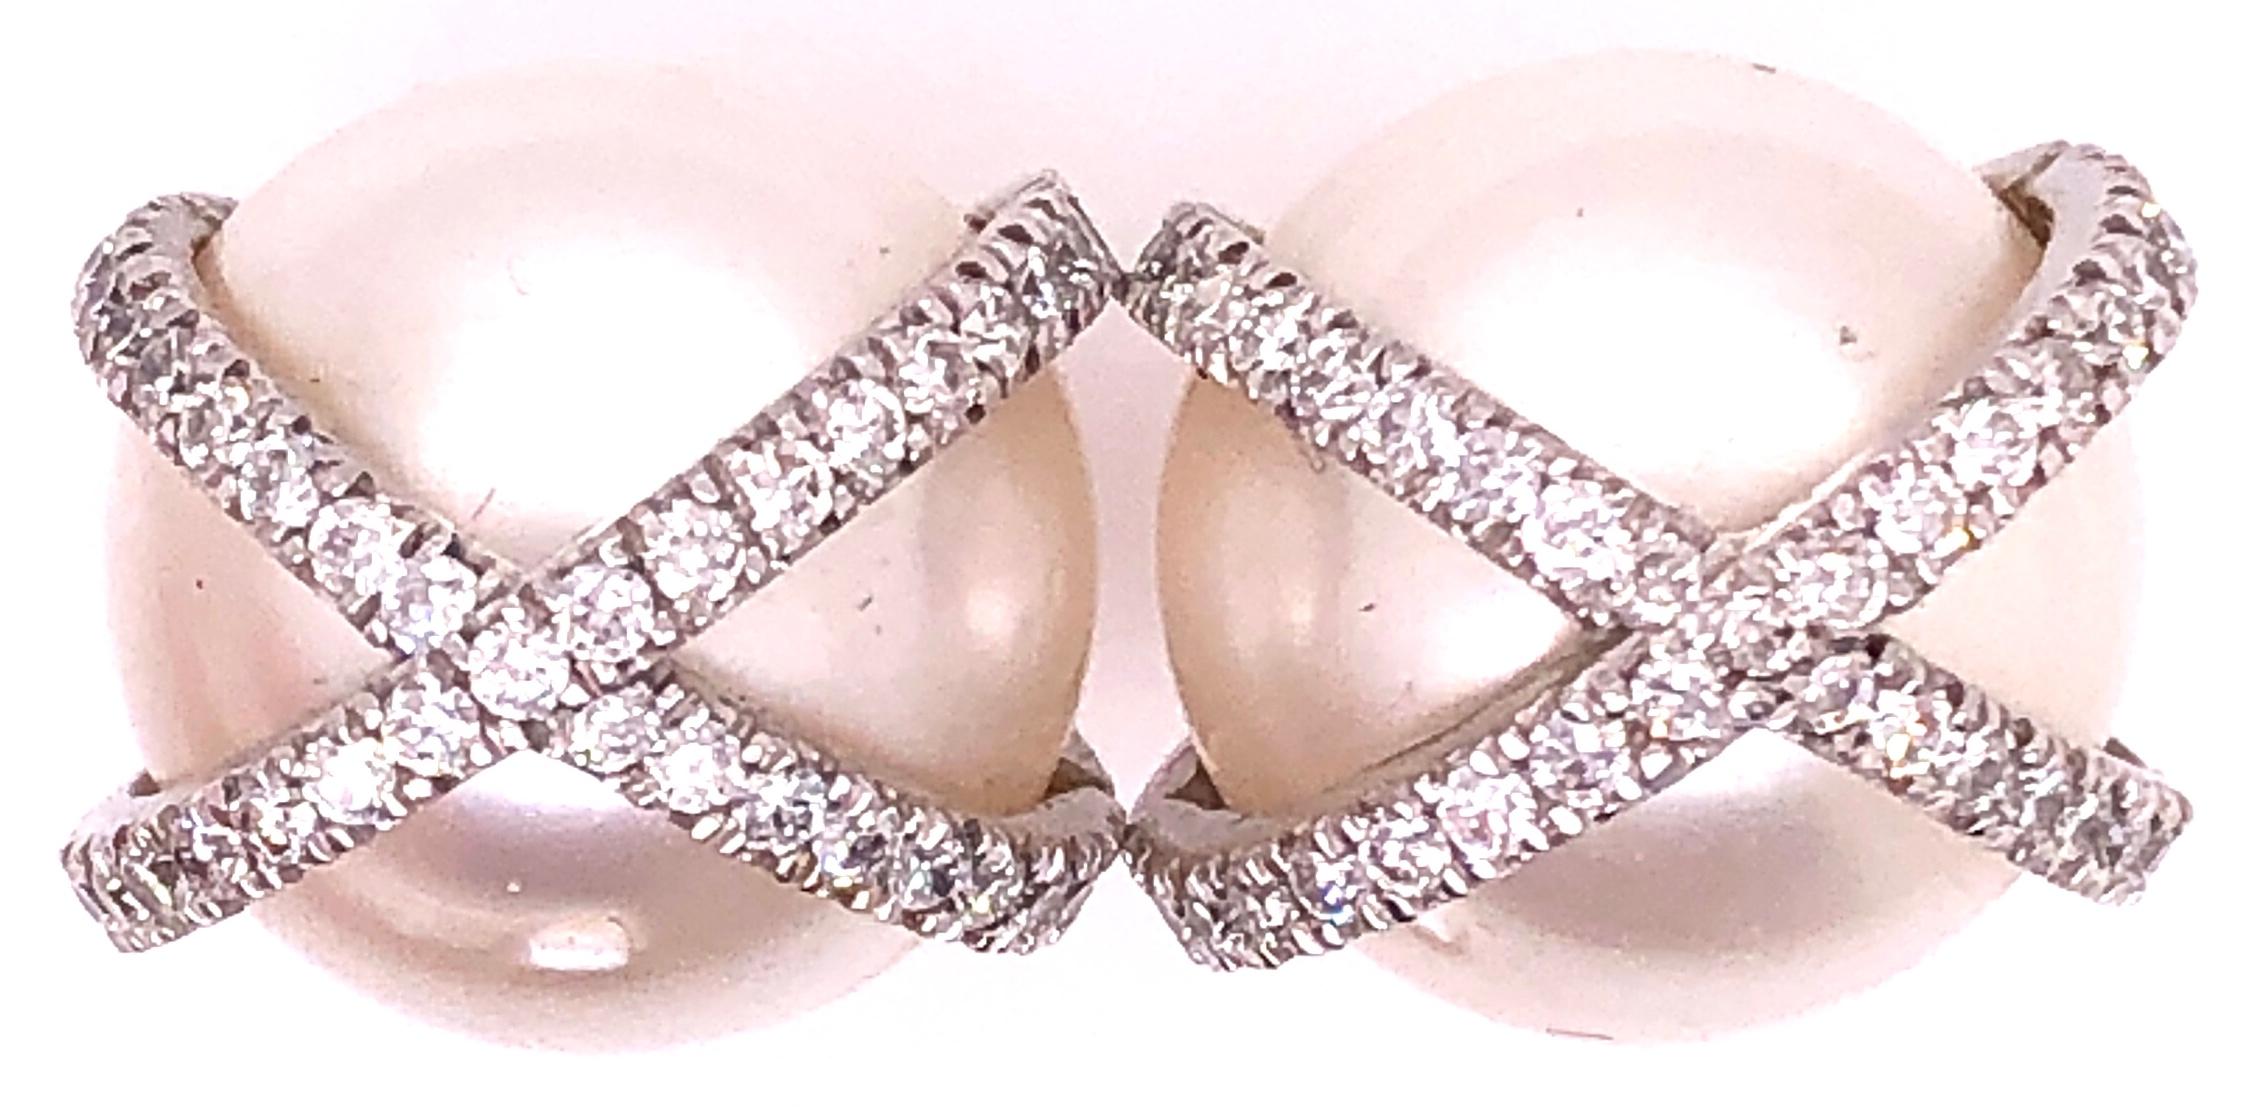 A Large and Impressive pair of 18 Karat White Gold Wrapped Pearl & Diamond Earrings. This Stunning pair of Baroque 14.25mm cultured pearls wrapped in gold and diamonds weighs 13.1 grams. Marked Mecan 750 PA AL also bearing another hallmark. The pair